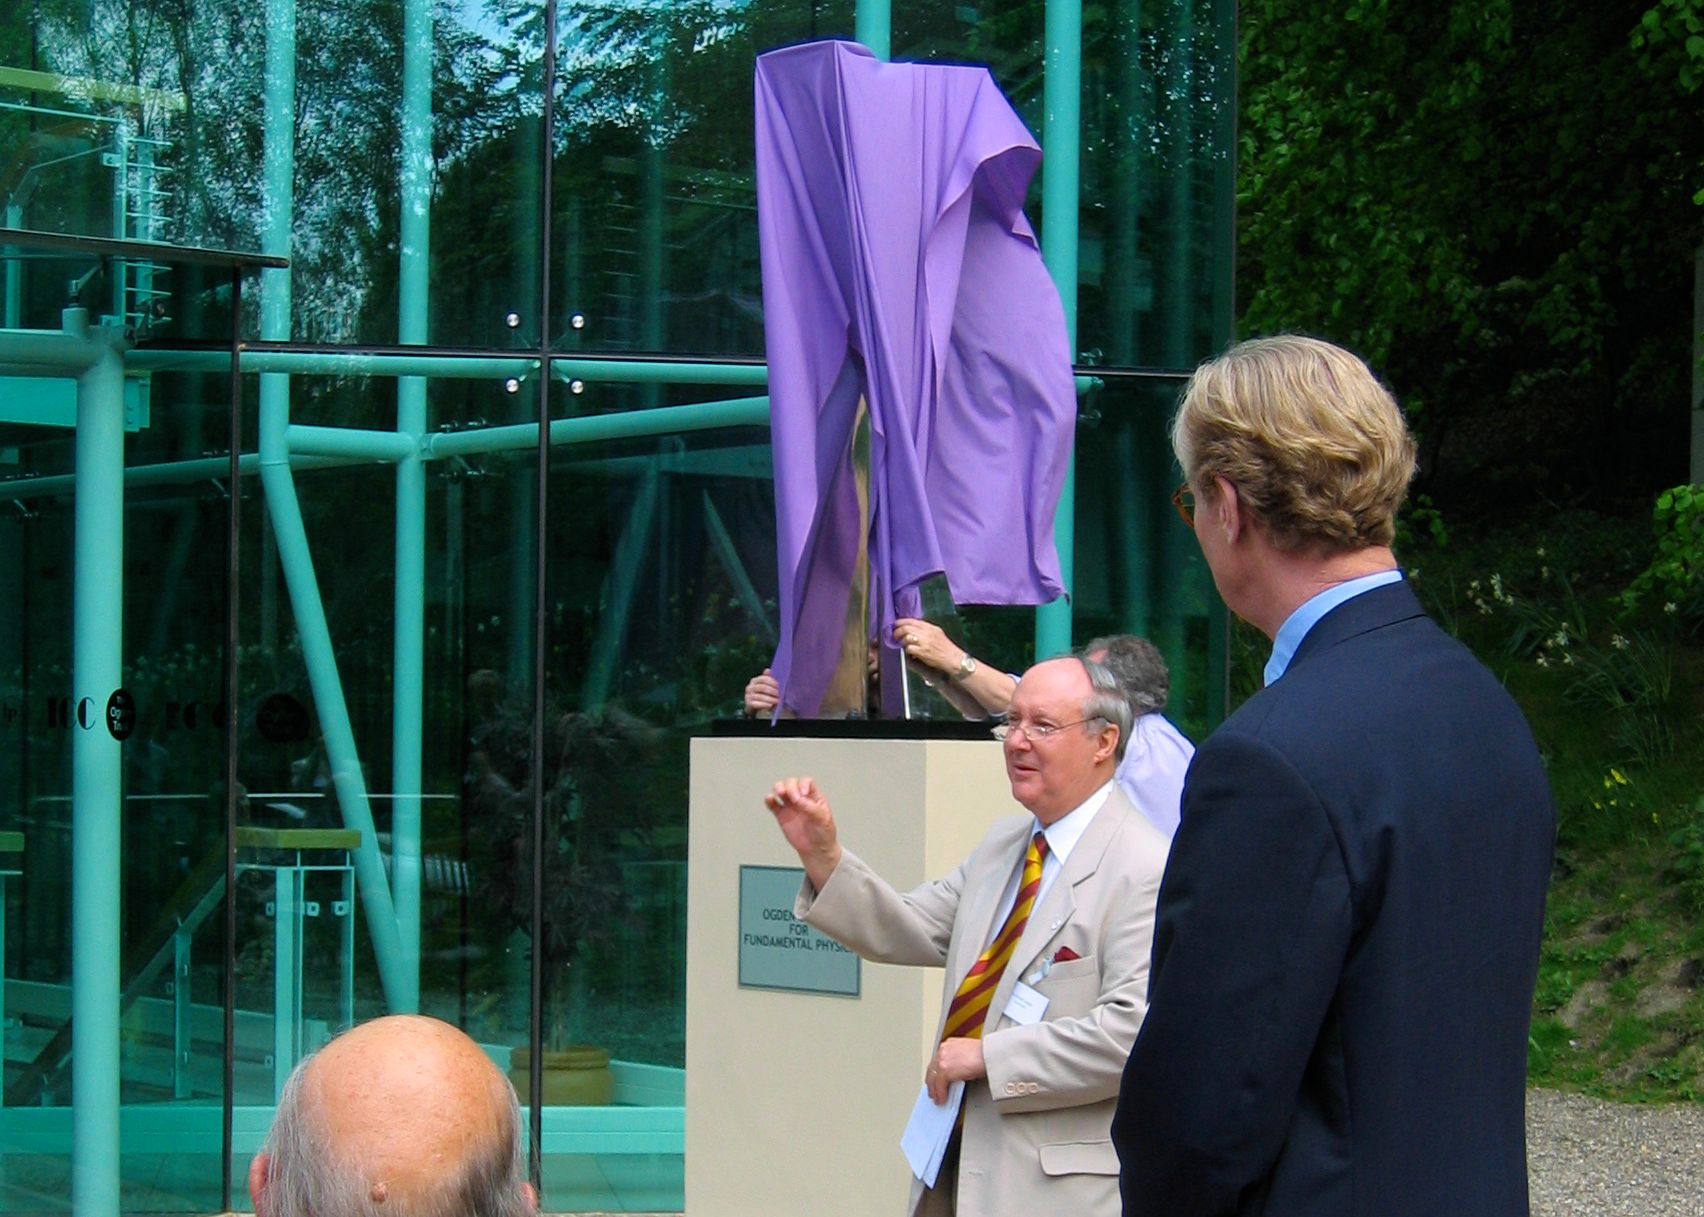 The Sculpture outside the Ogden Centre for Fundamental Physics is formally unveiled, called Forces of Nature